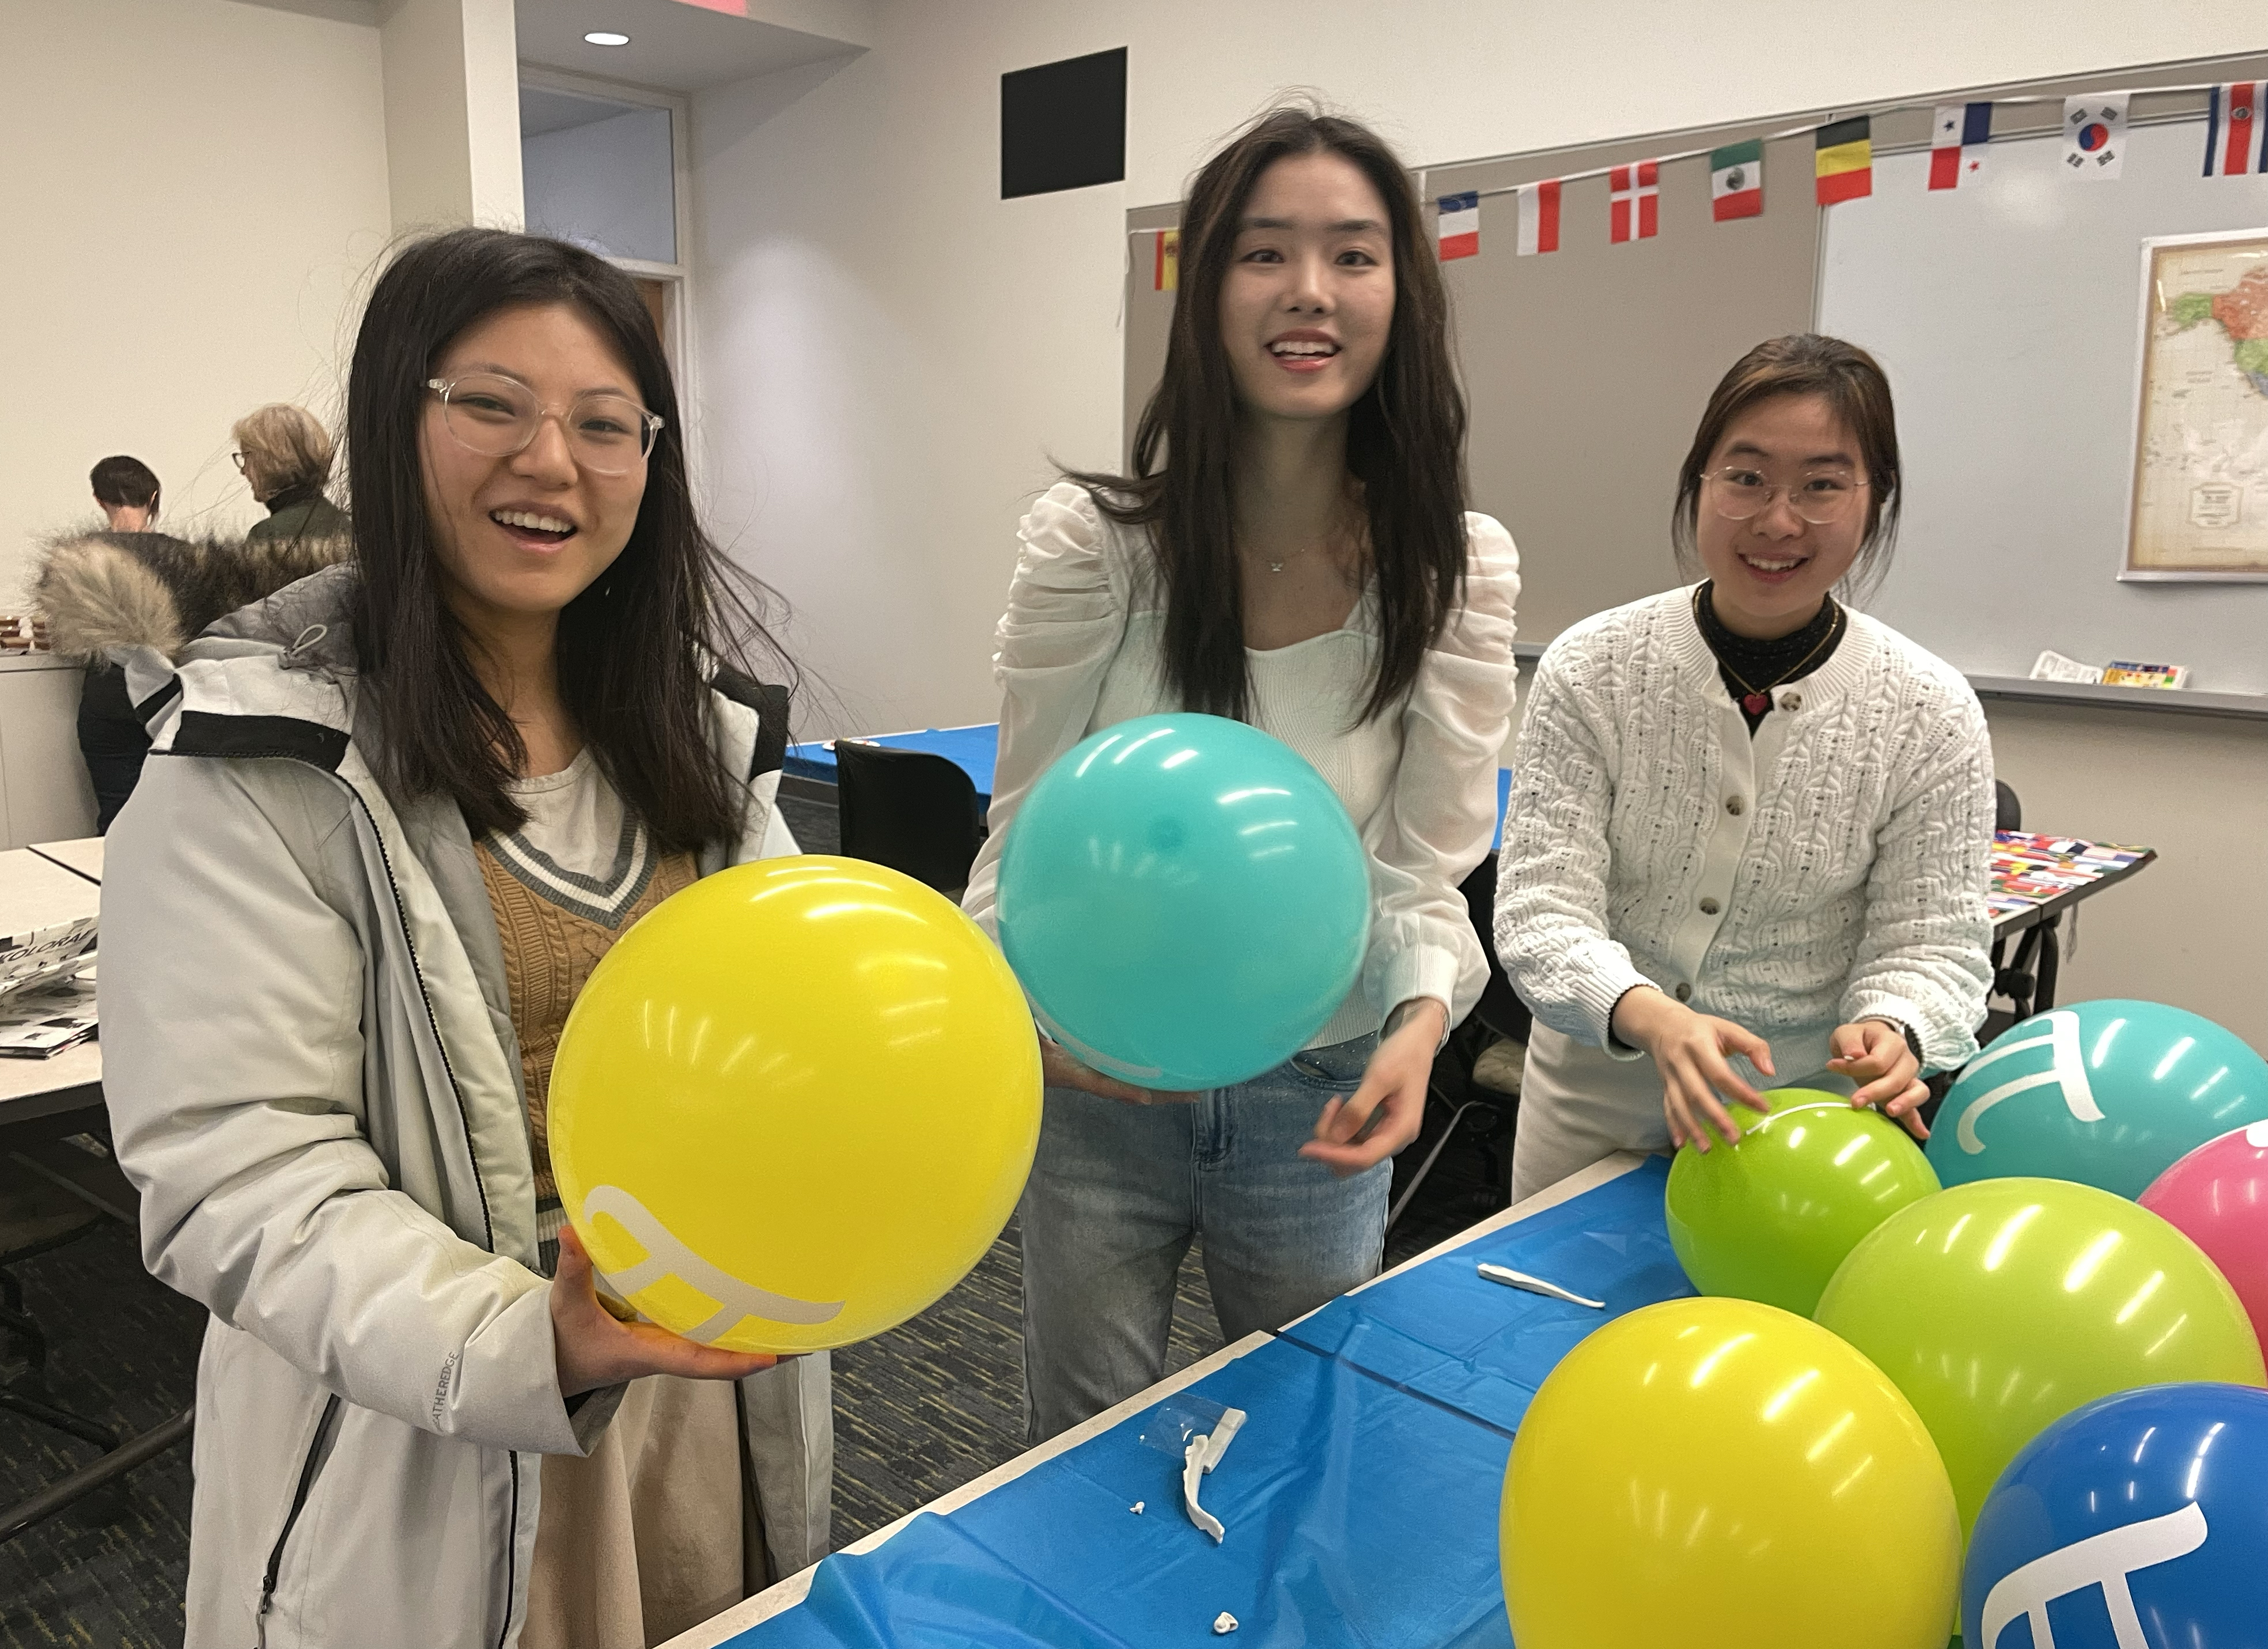 Asian girls help install balloons with pi symbol